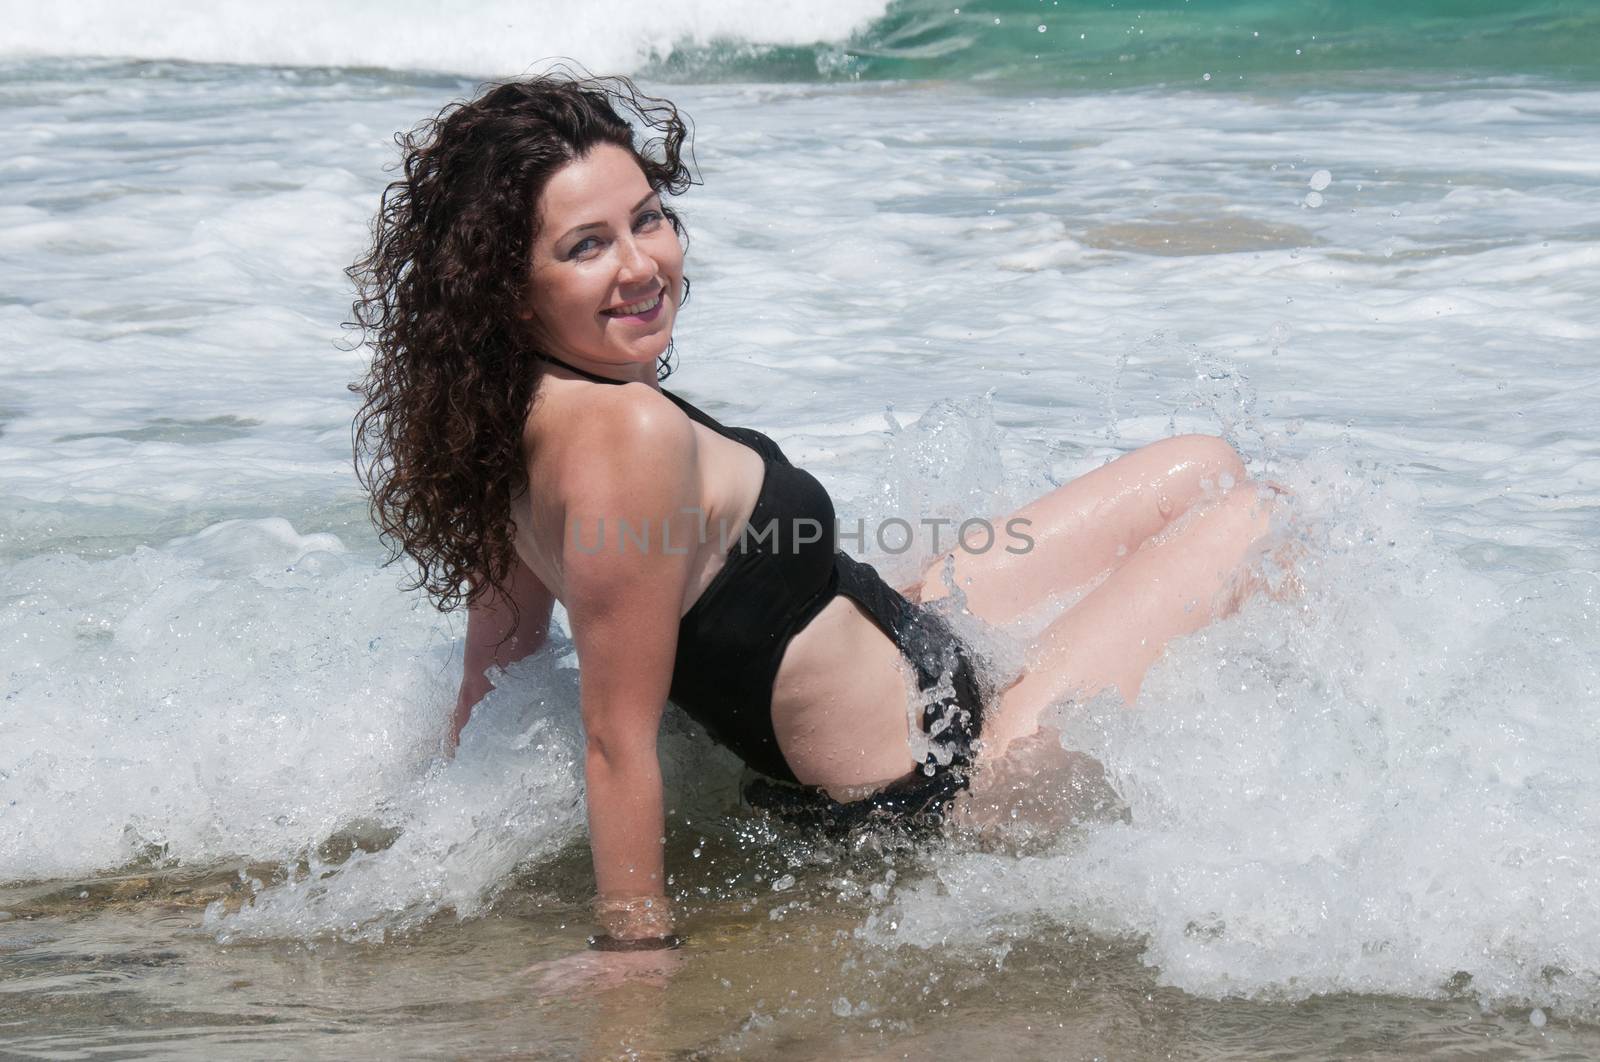 Girl in a black bathing suit sitting in the waves in the sea and laughing happily